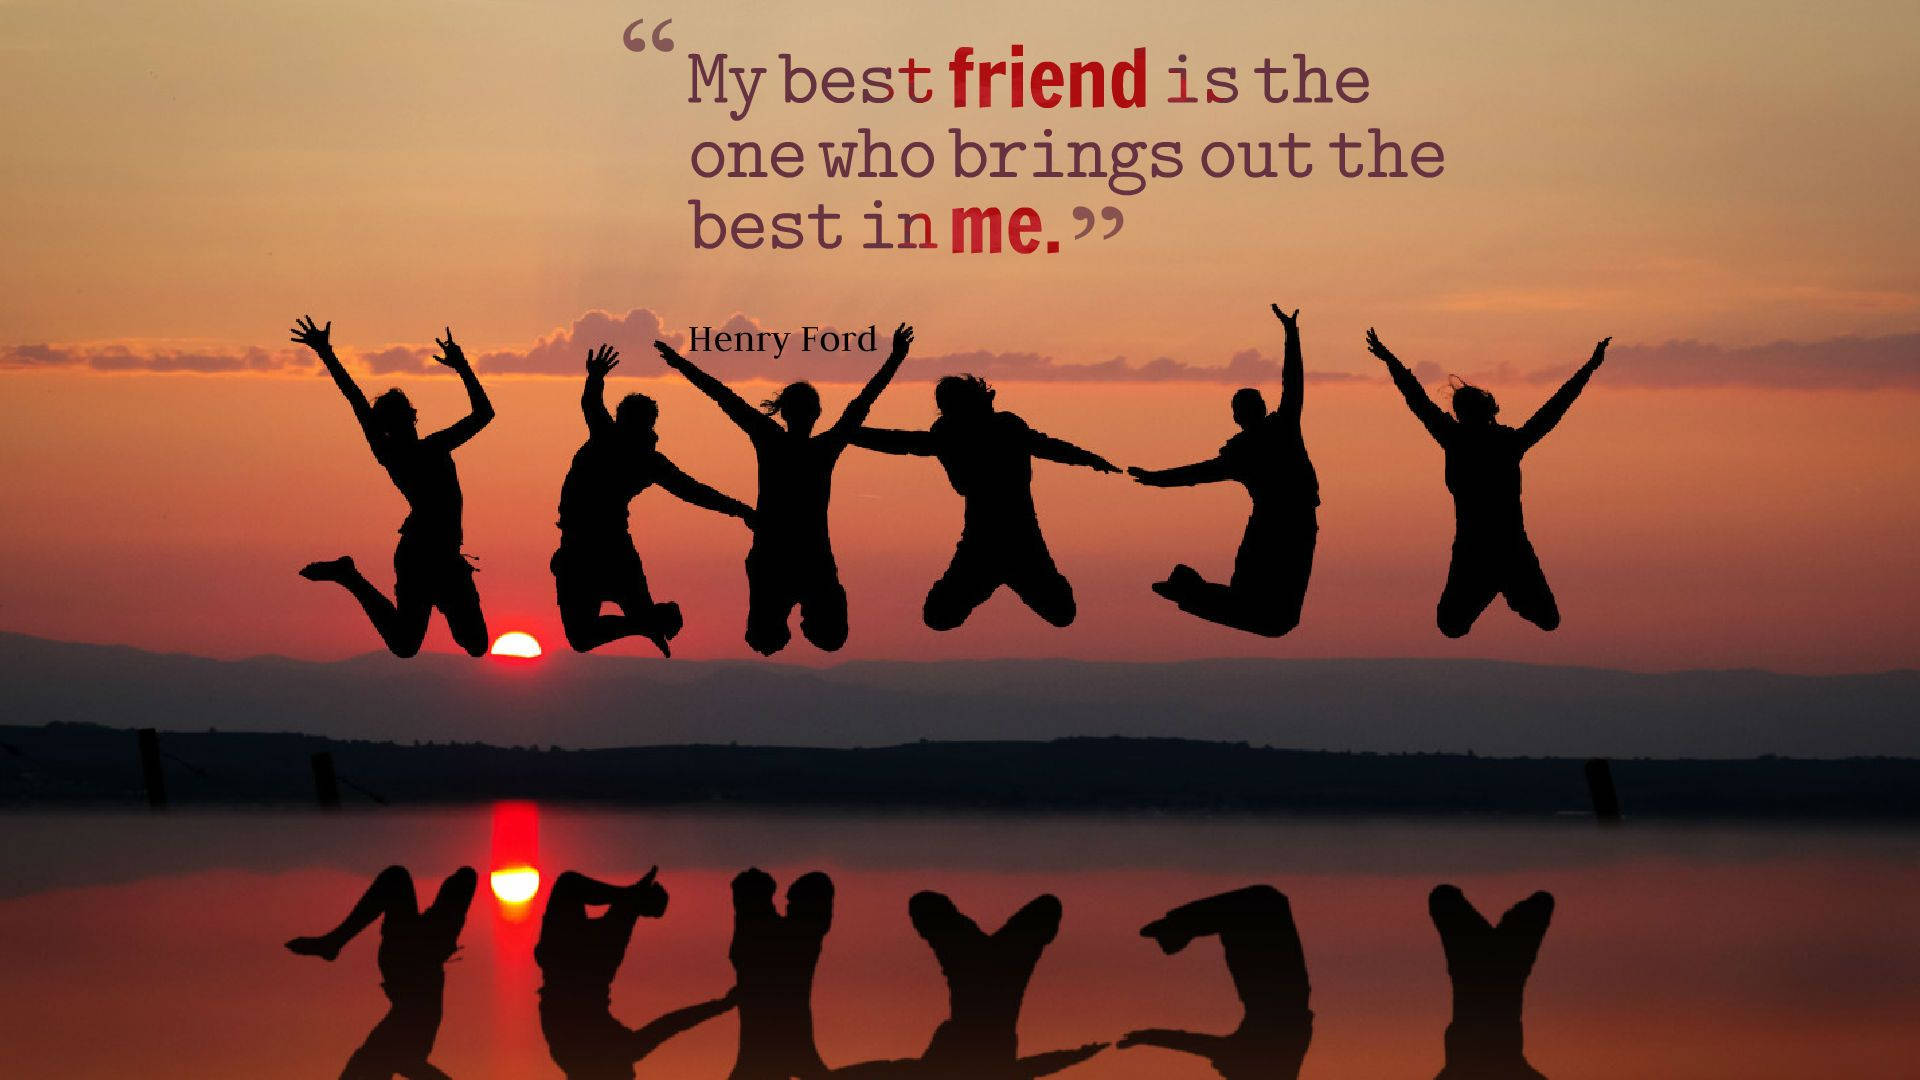 Unearth The Best In Me - Expressive Friendship Quote